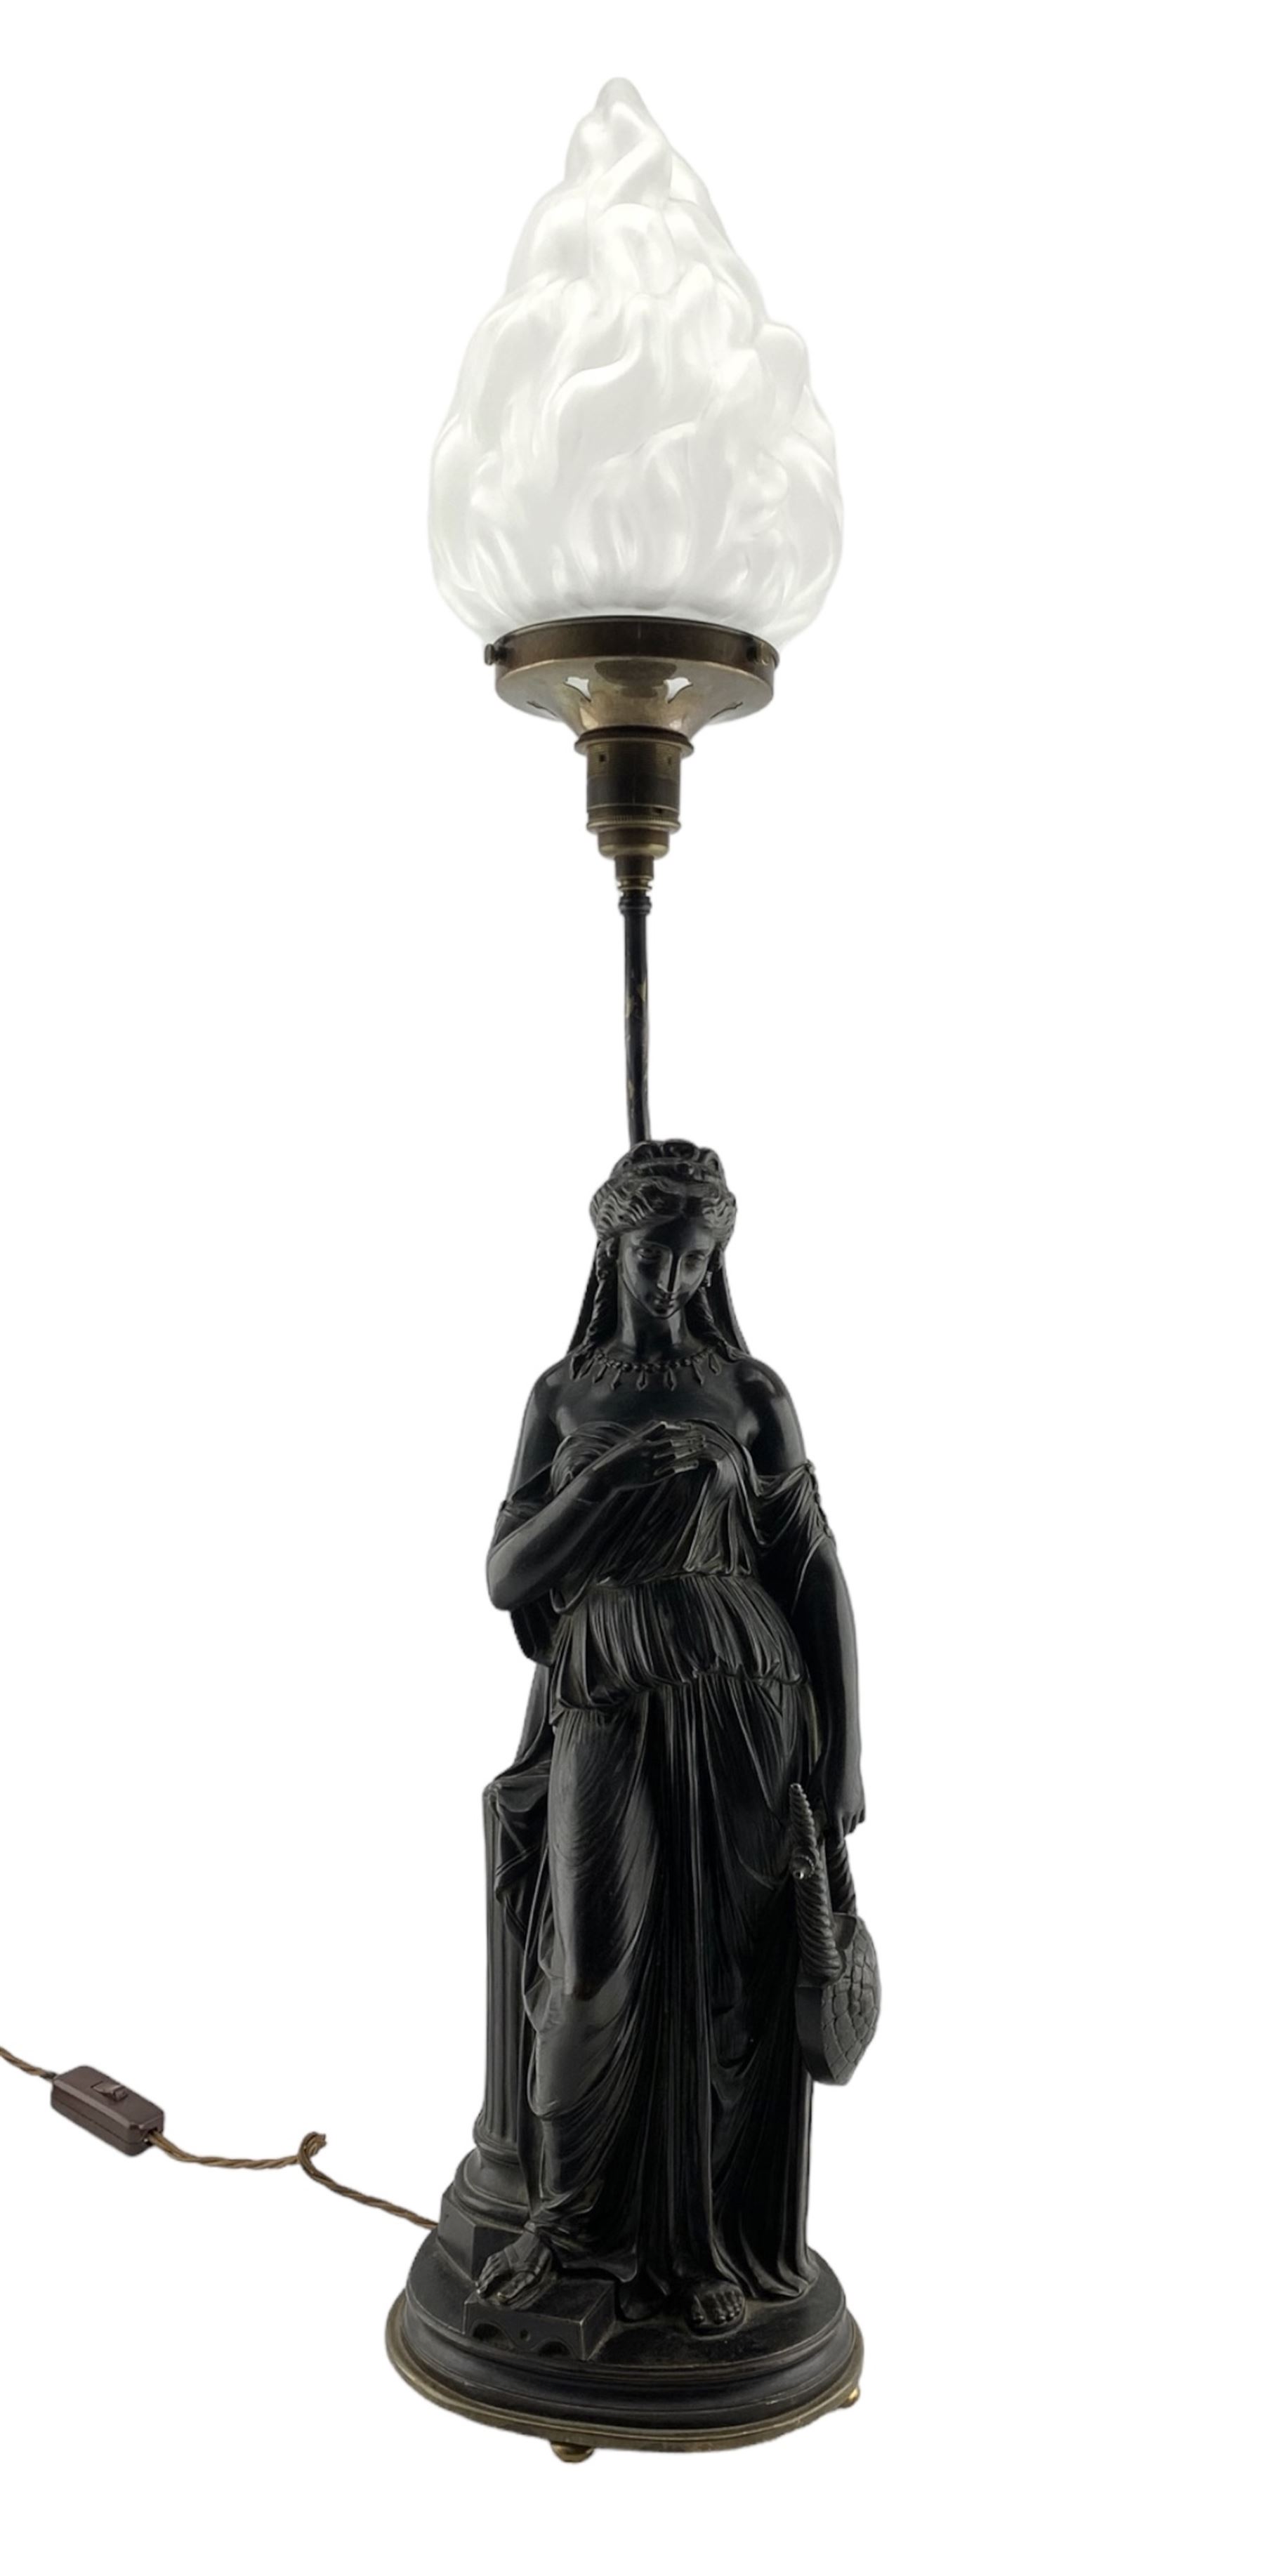 19th century patinated bronze figural table lamp modelled as Erato